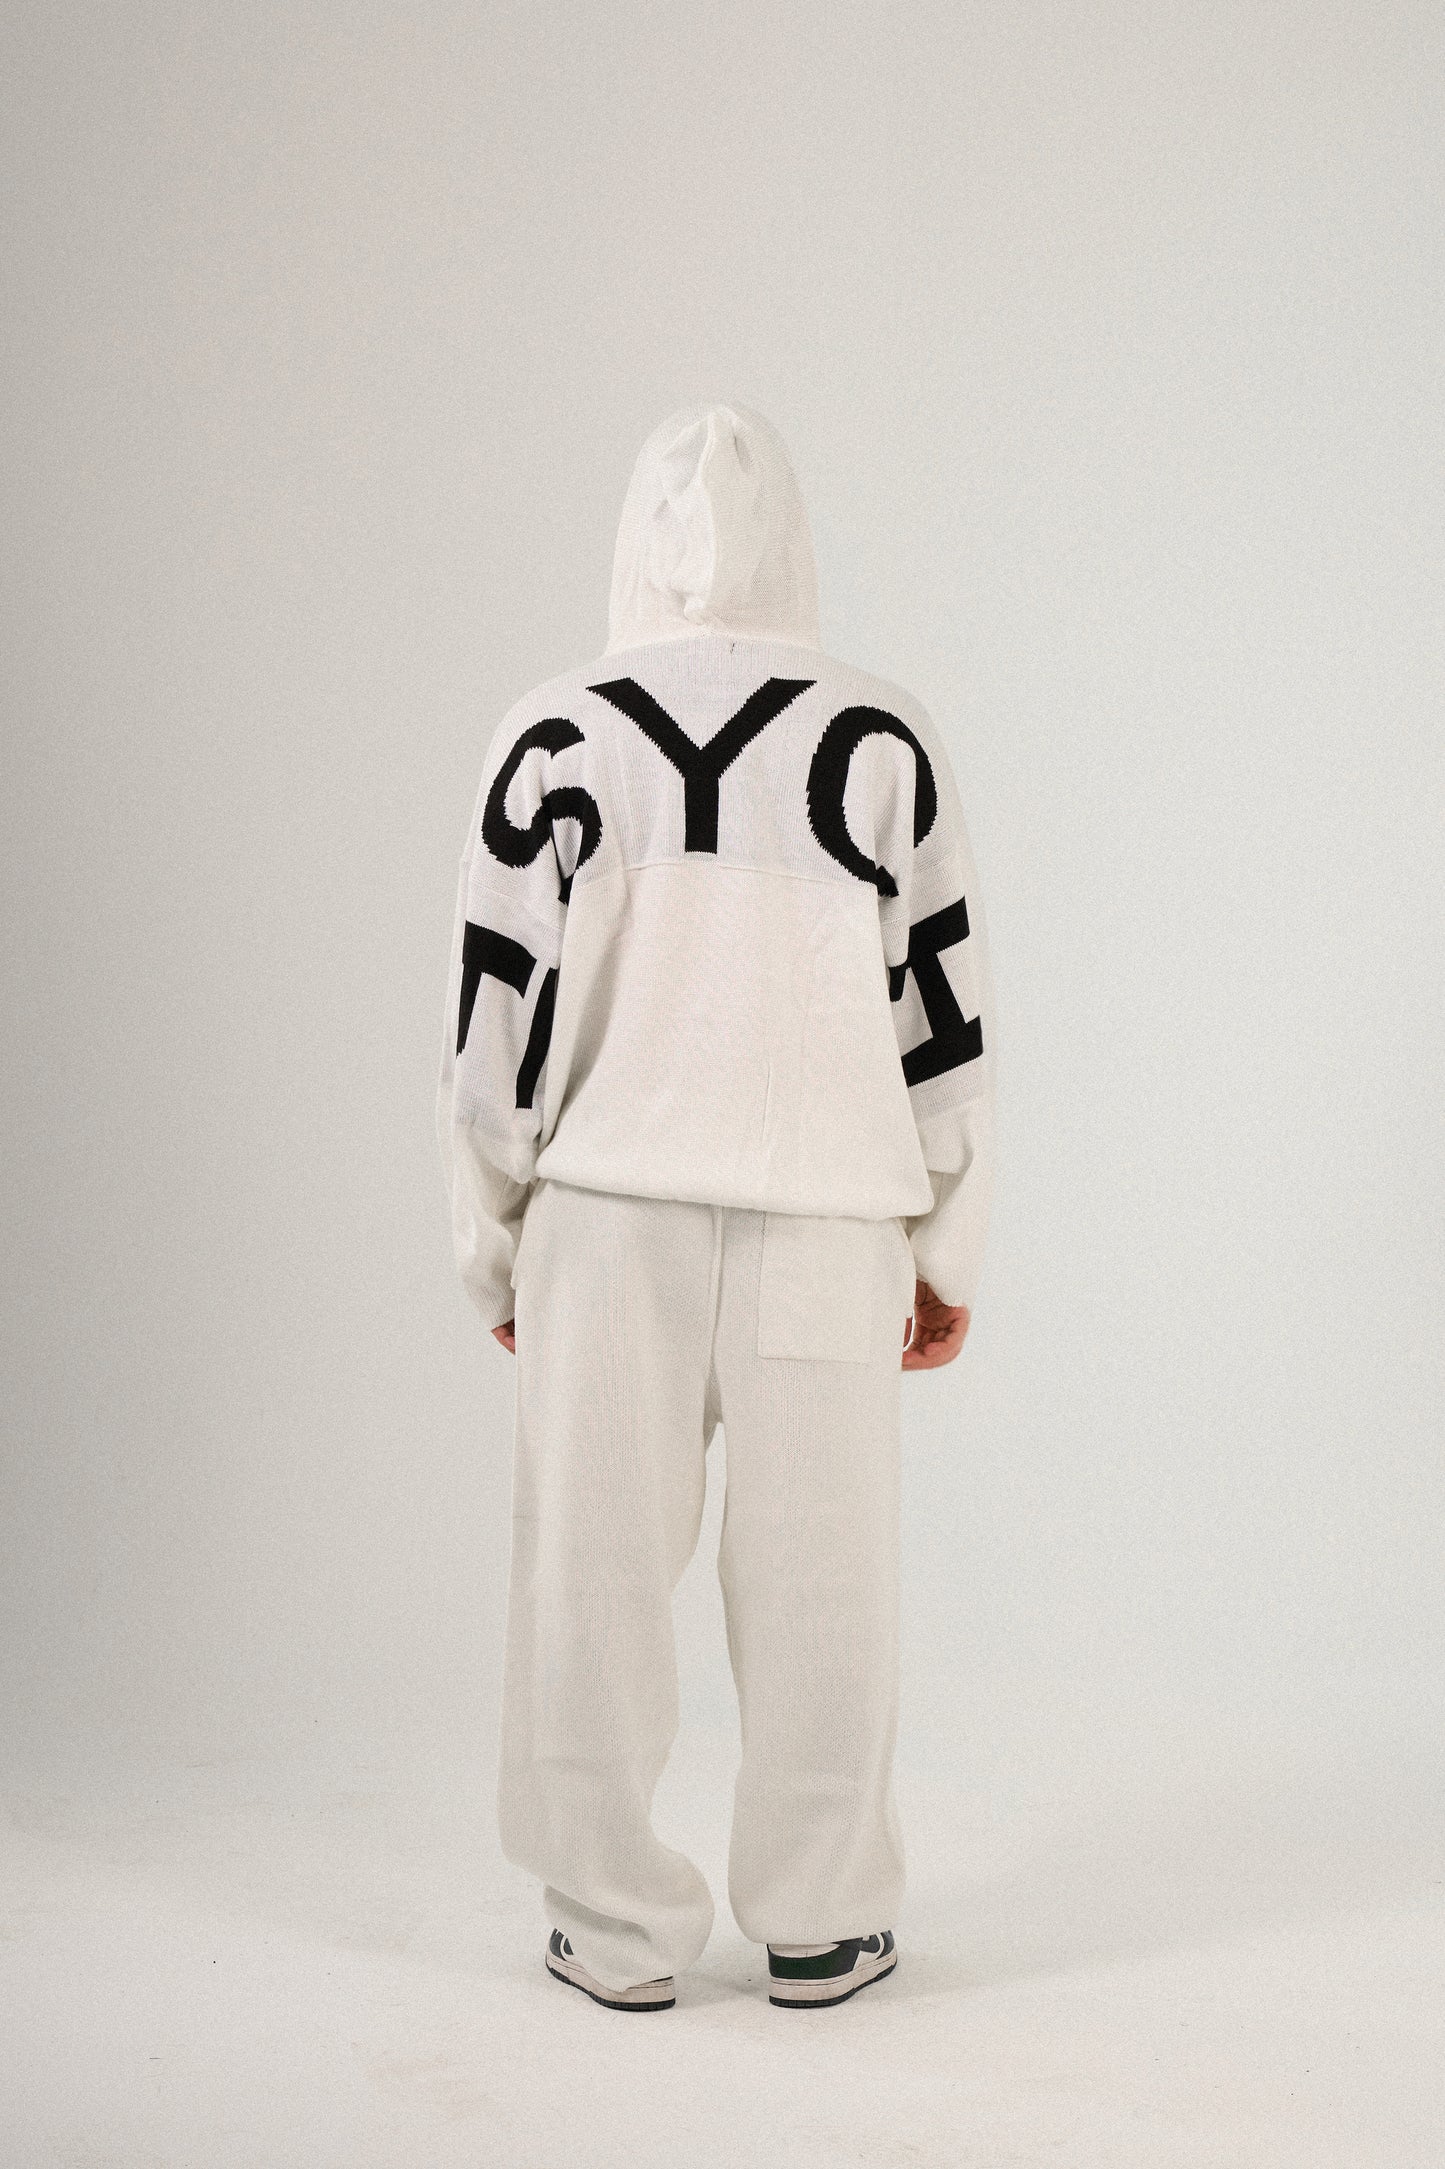 PSYCH WHITE KNITTED PANTS